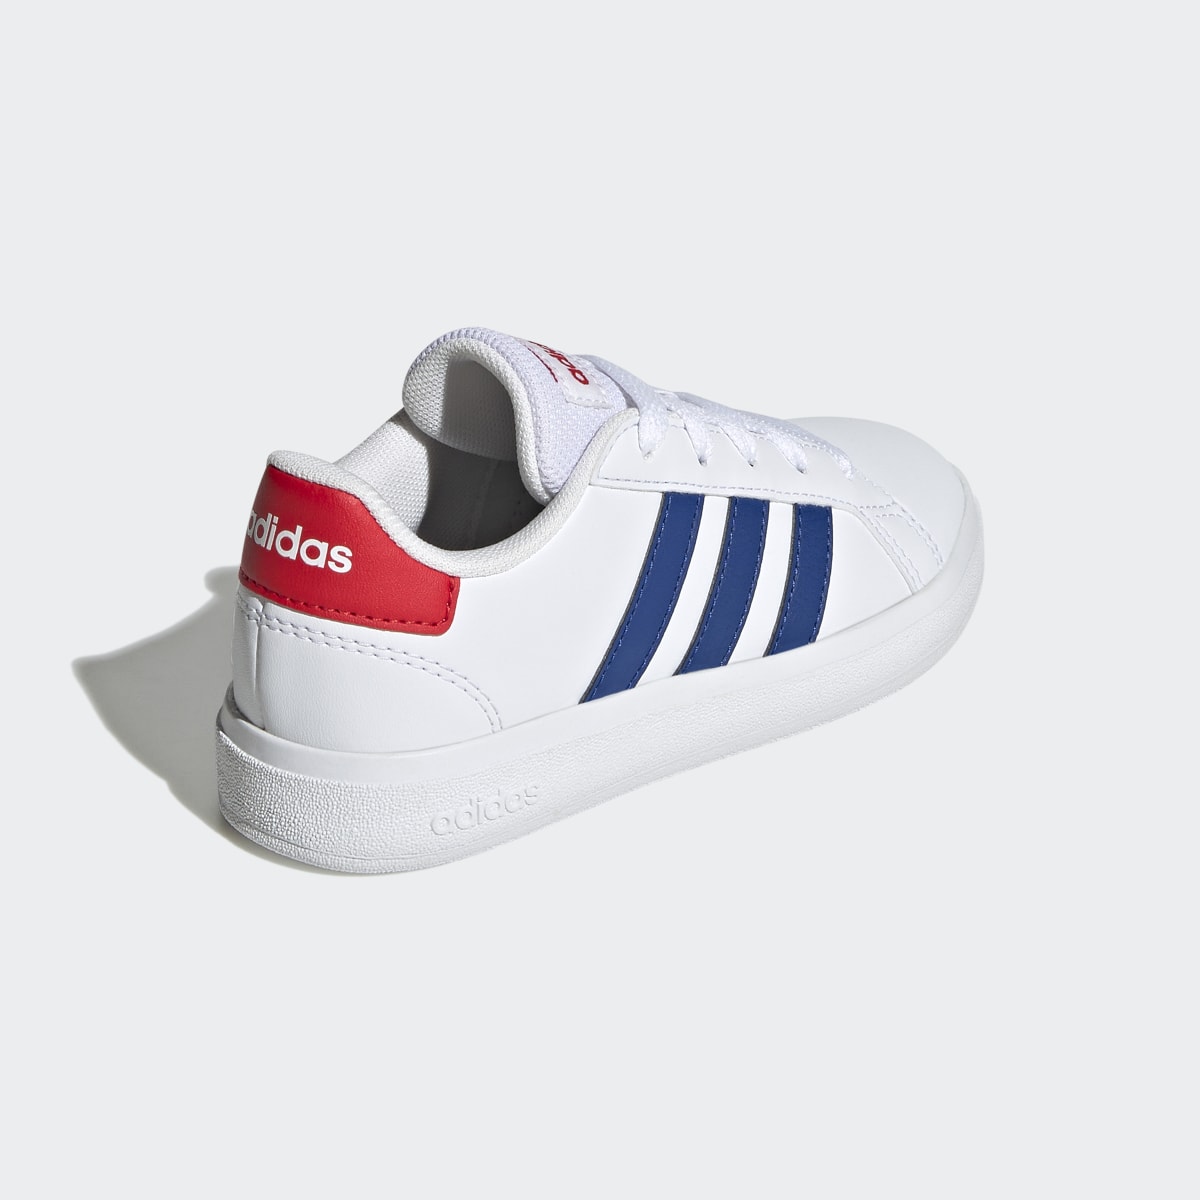 Adidas Grand Court Lifestyle Tennis Lace-Up Schuh. 6